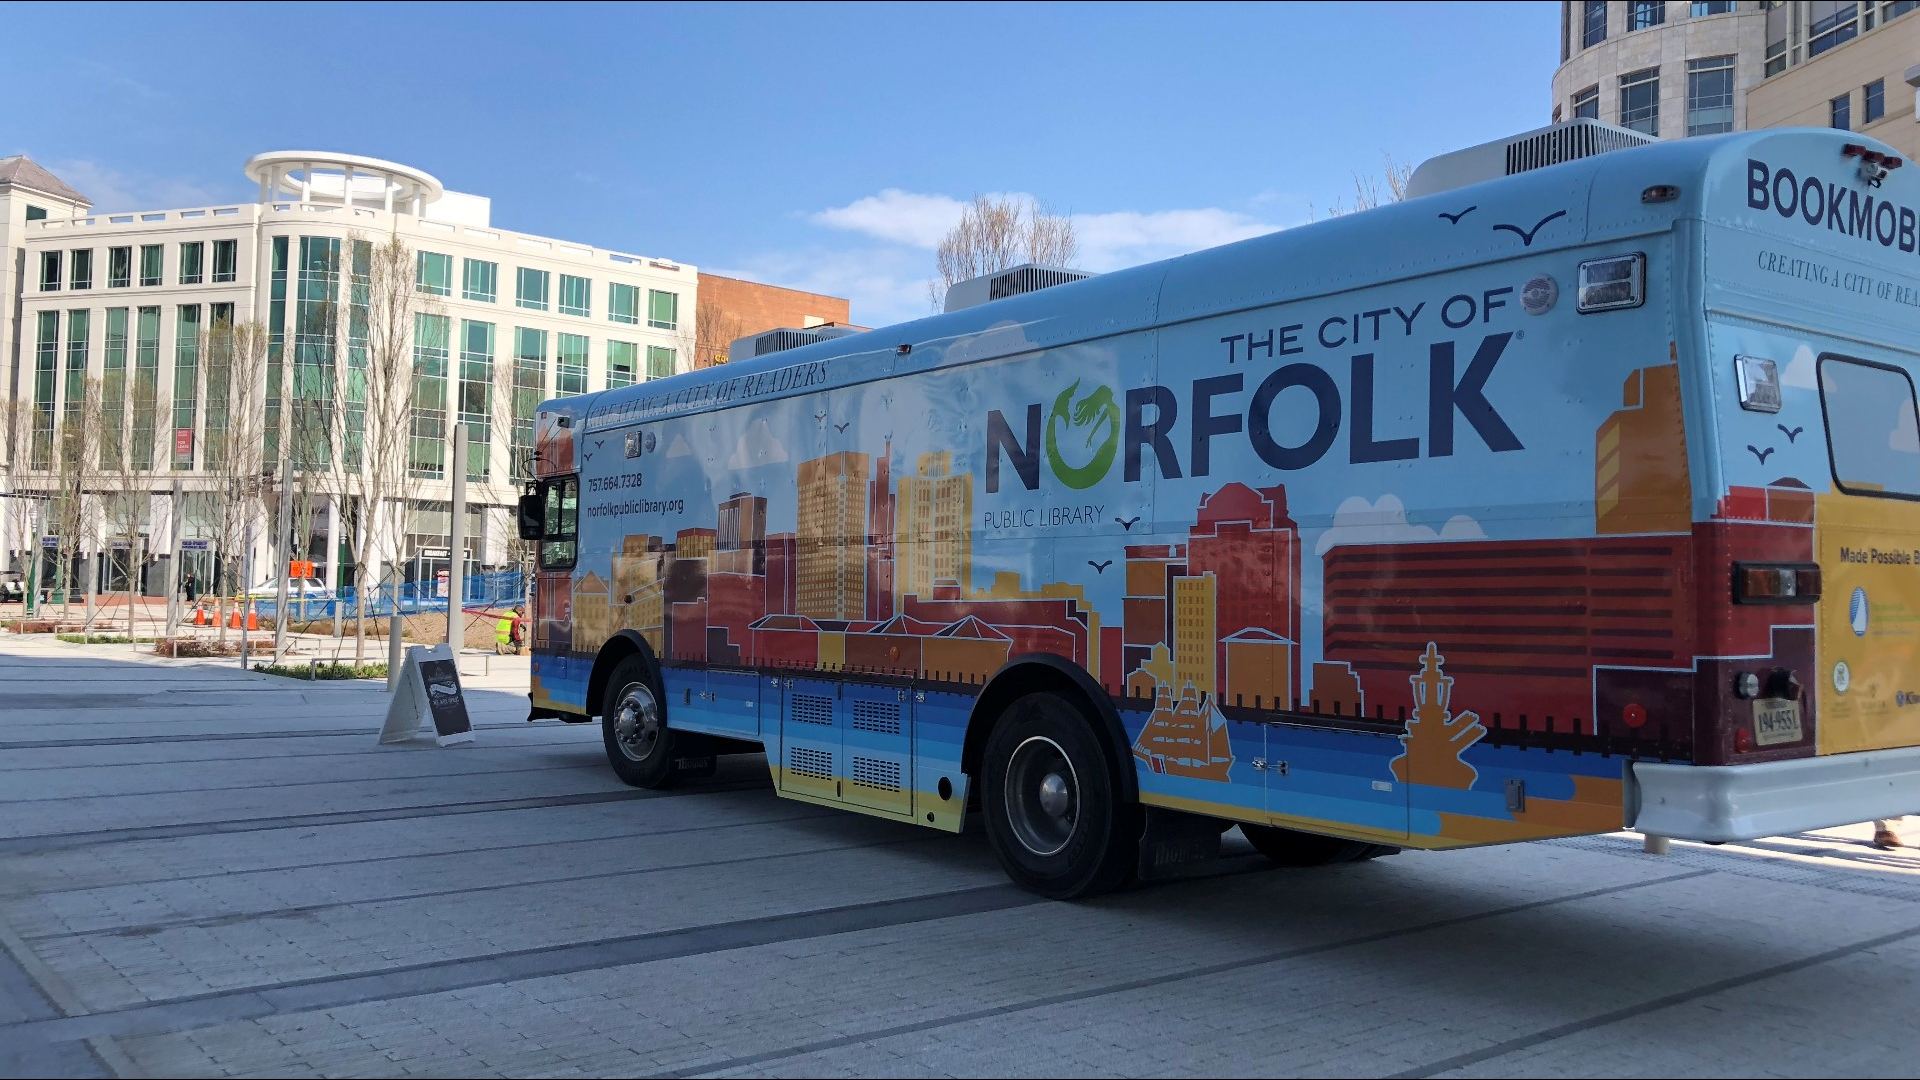 Norfolk's Bookmobile is hitting the streets for National Bookmobile Day